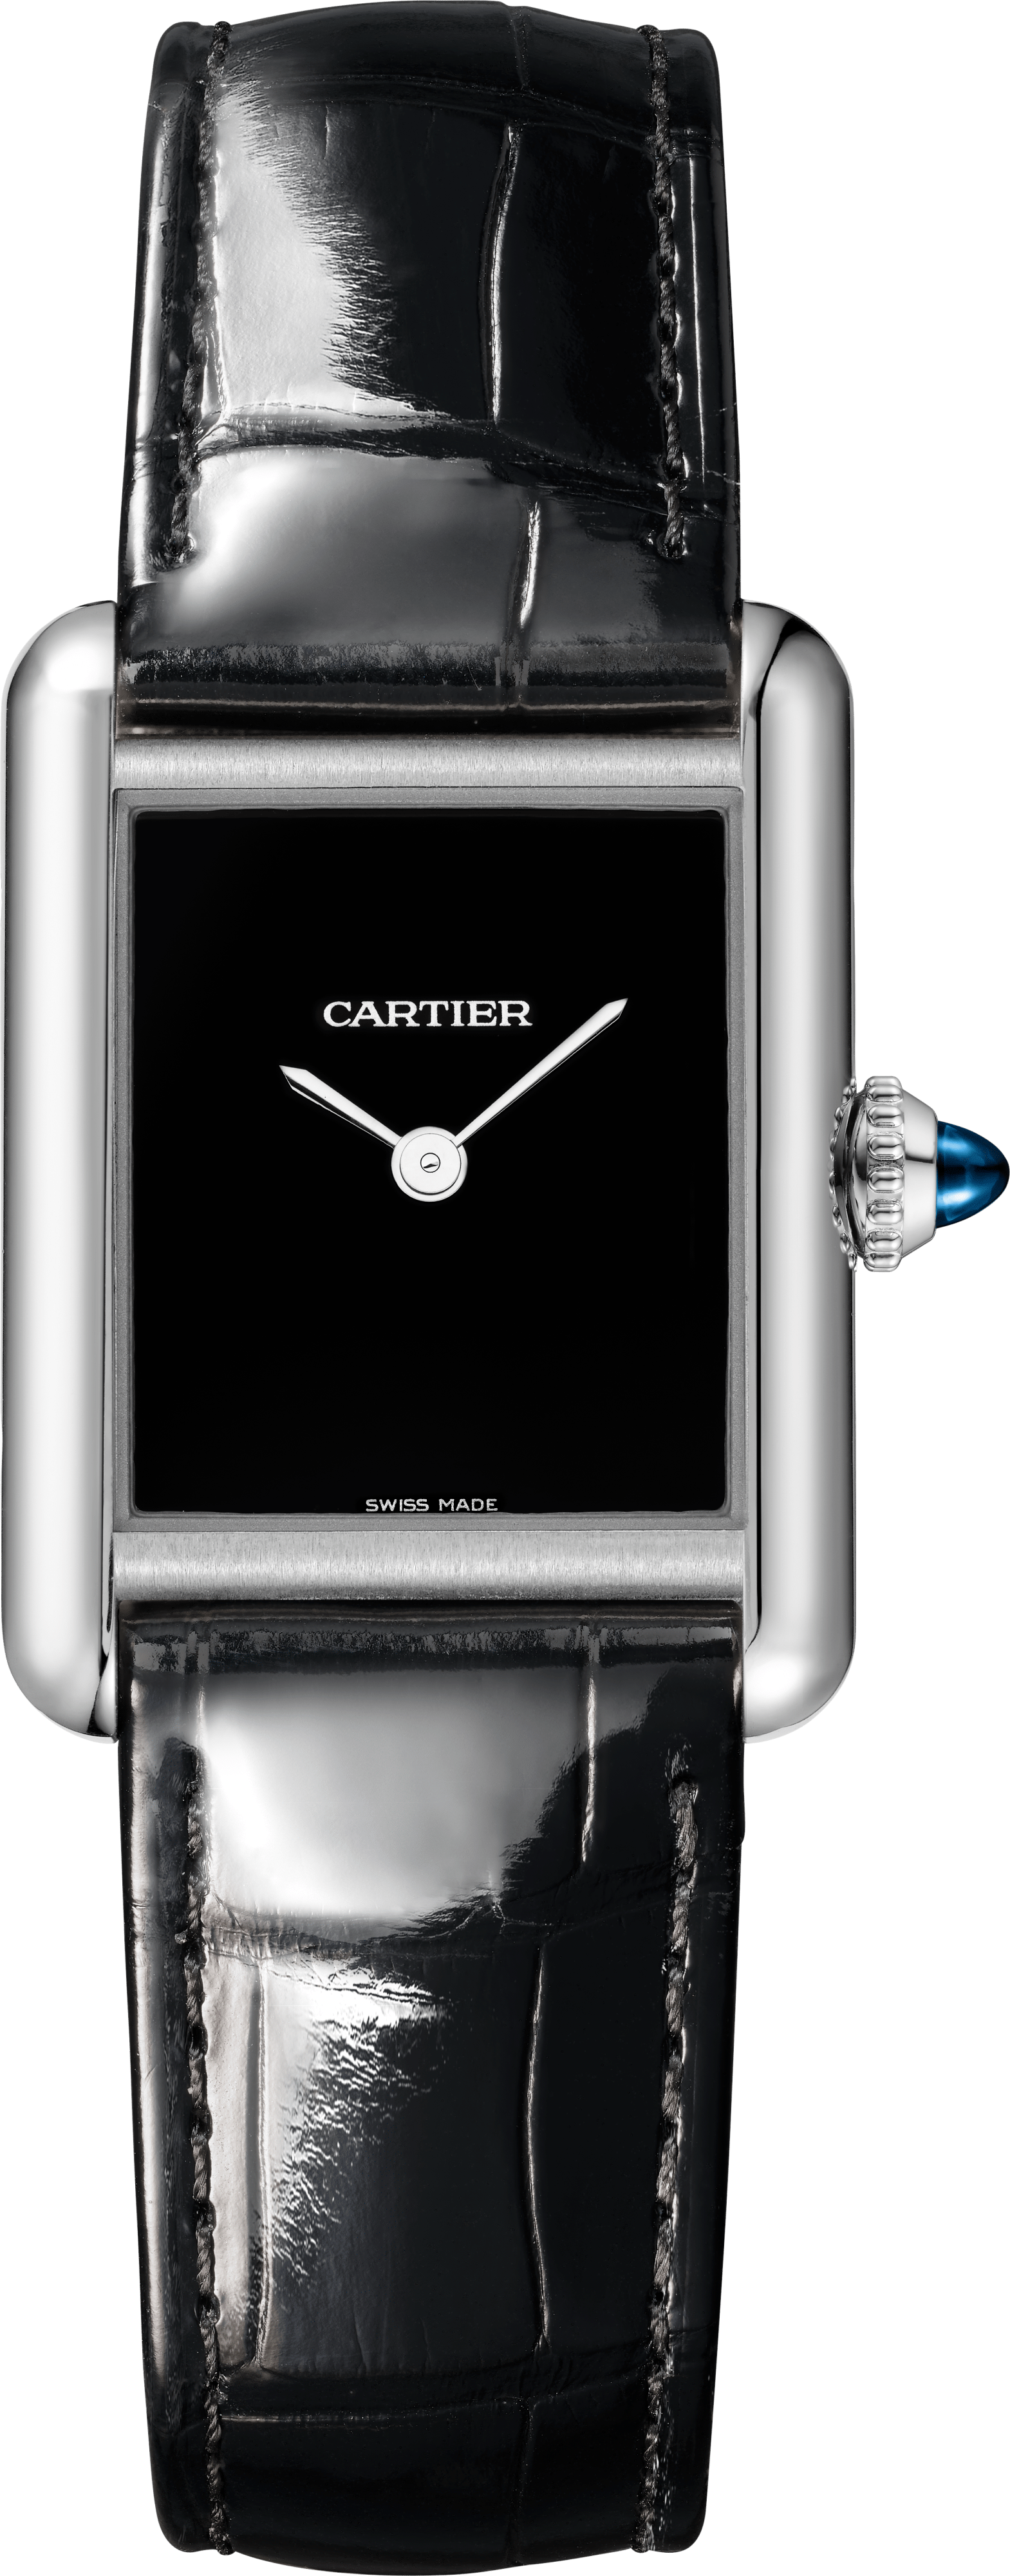 CARTIER TANK MUST-exchage-image